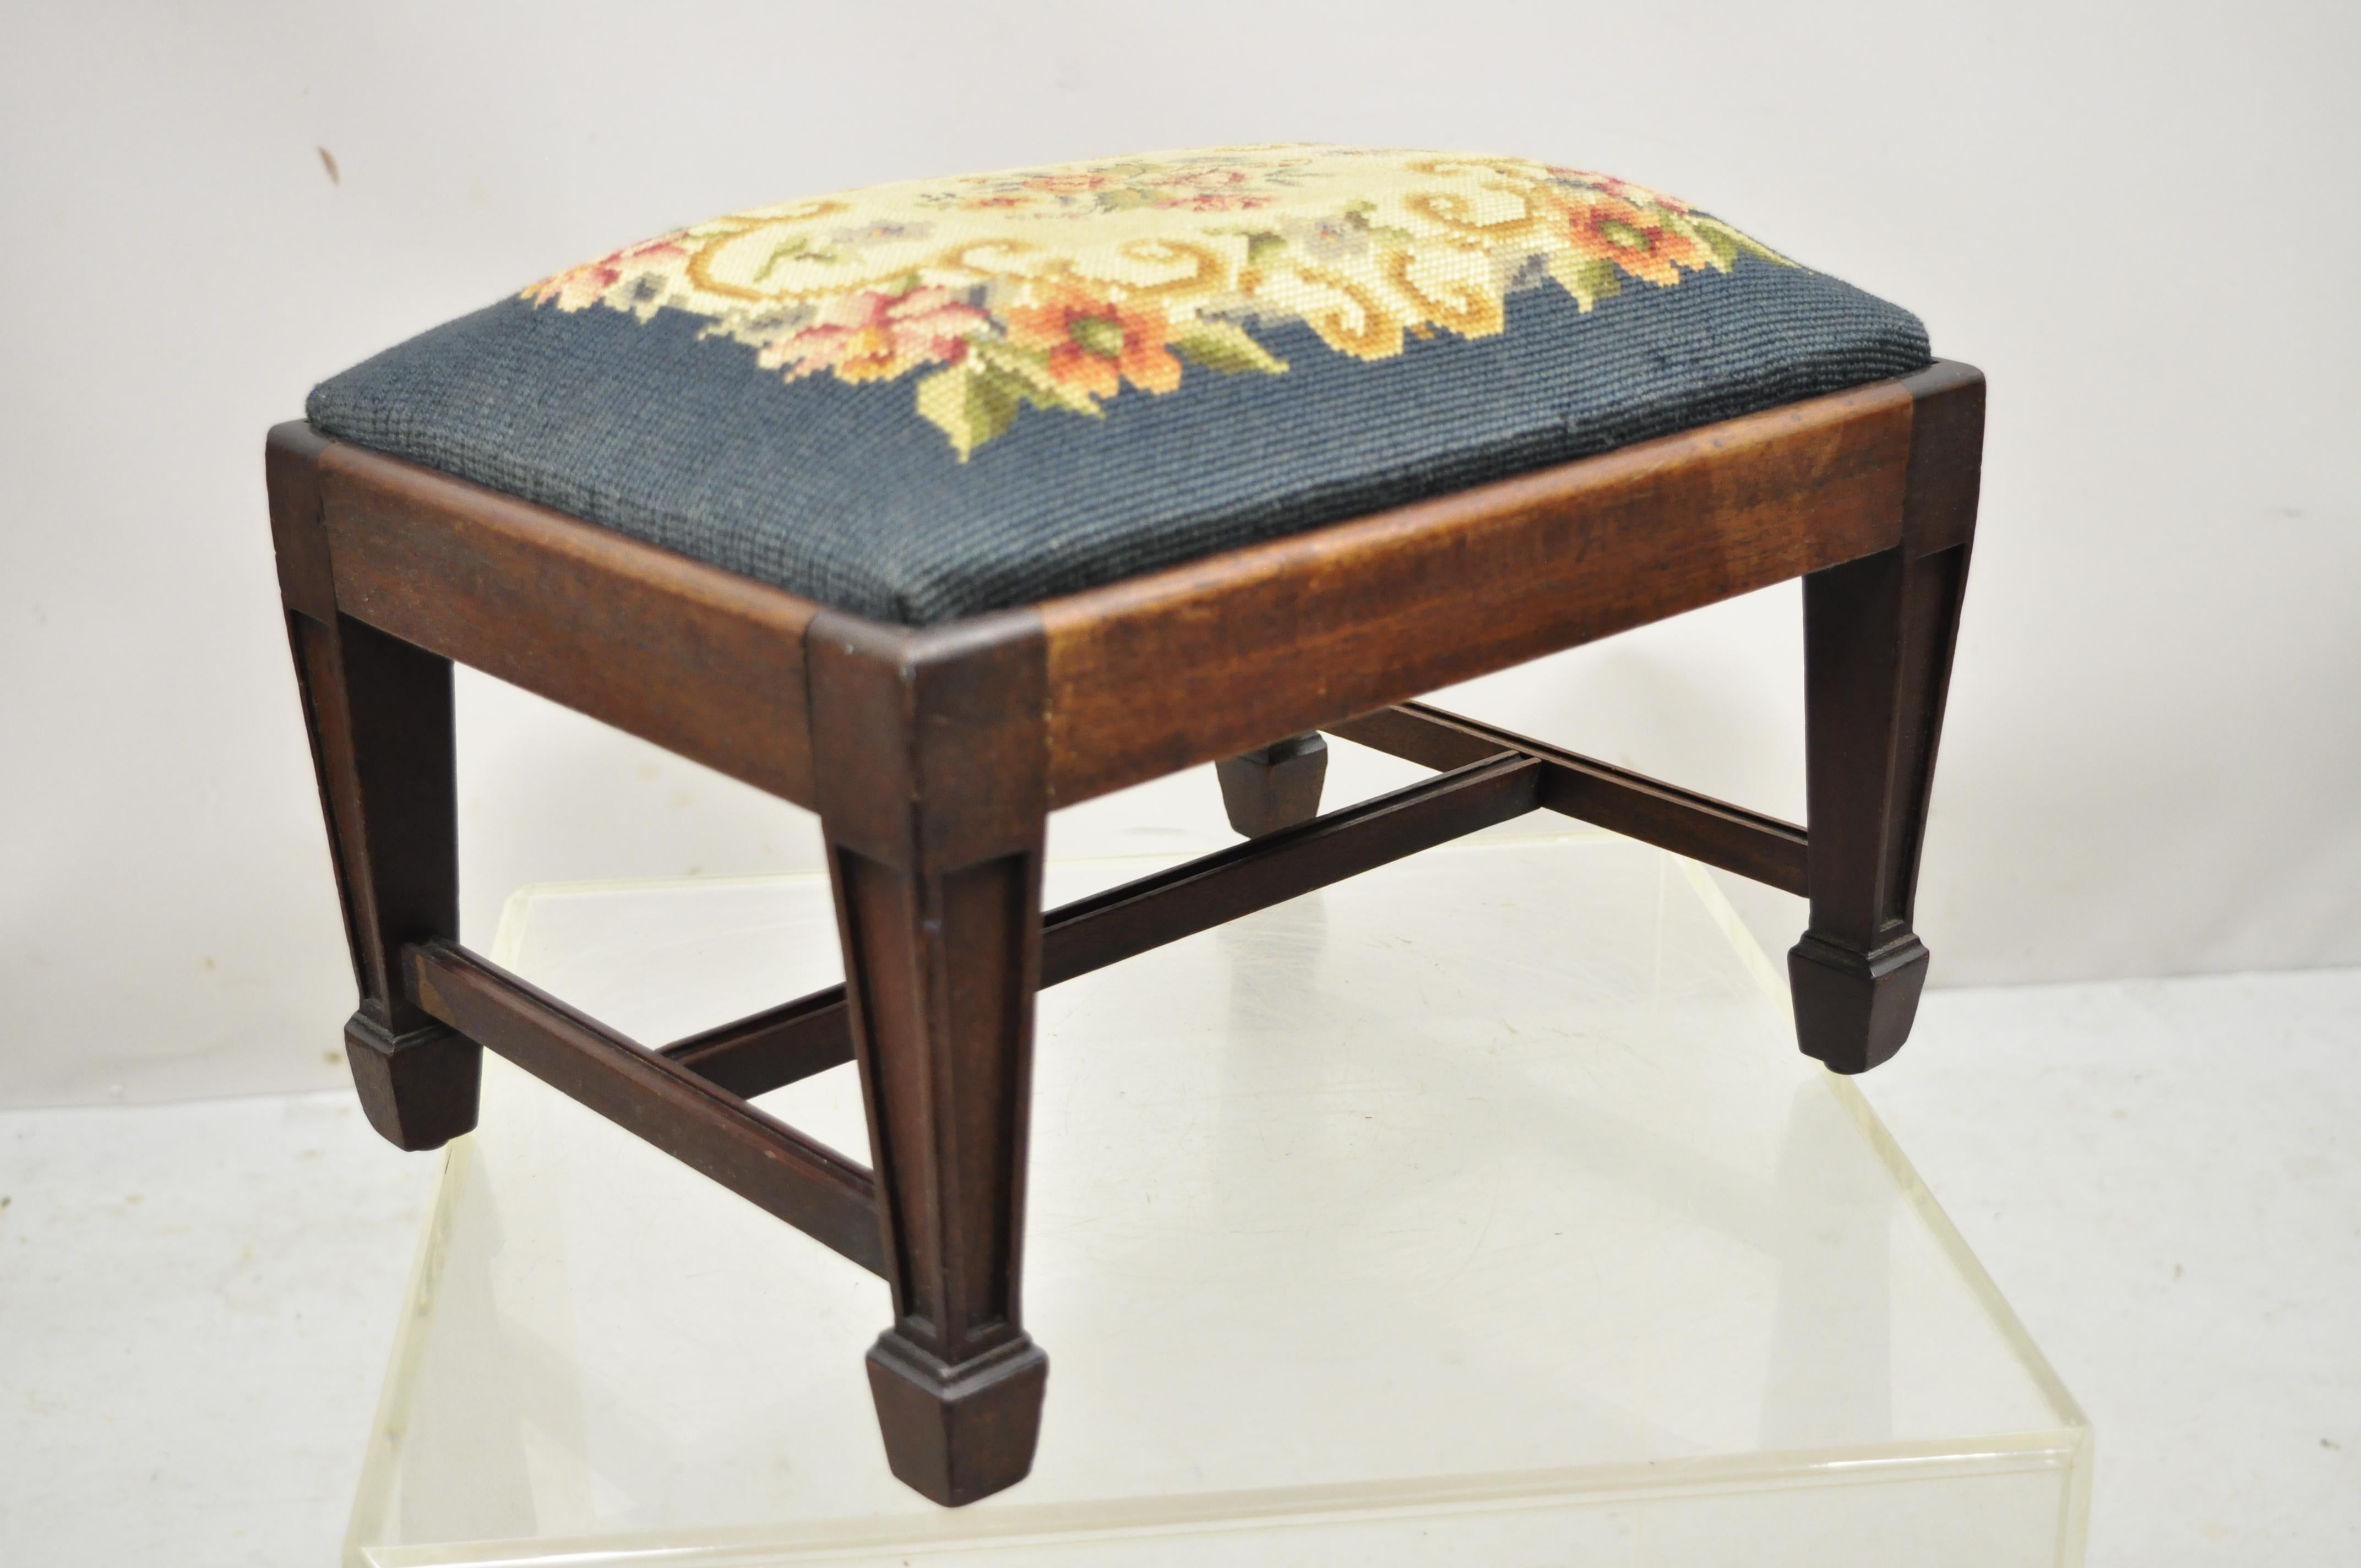 Antique Federal / Sheraton Mahogany green needlepoint small petite footstool ottoman. Item features stretcher base, green floral needlepoint seat, solid wood frame, tapered legs, very nice antique item, quality American craftsmanship, great style